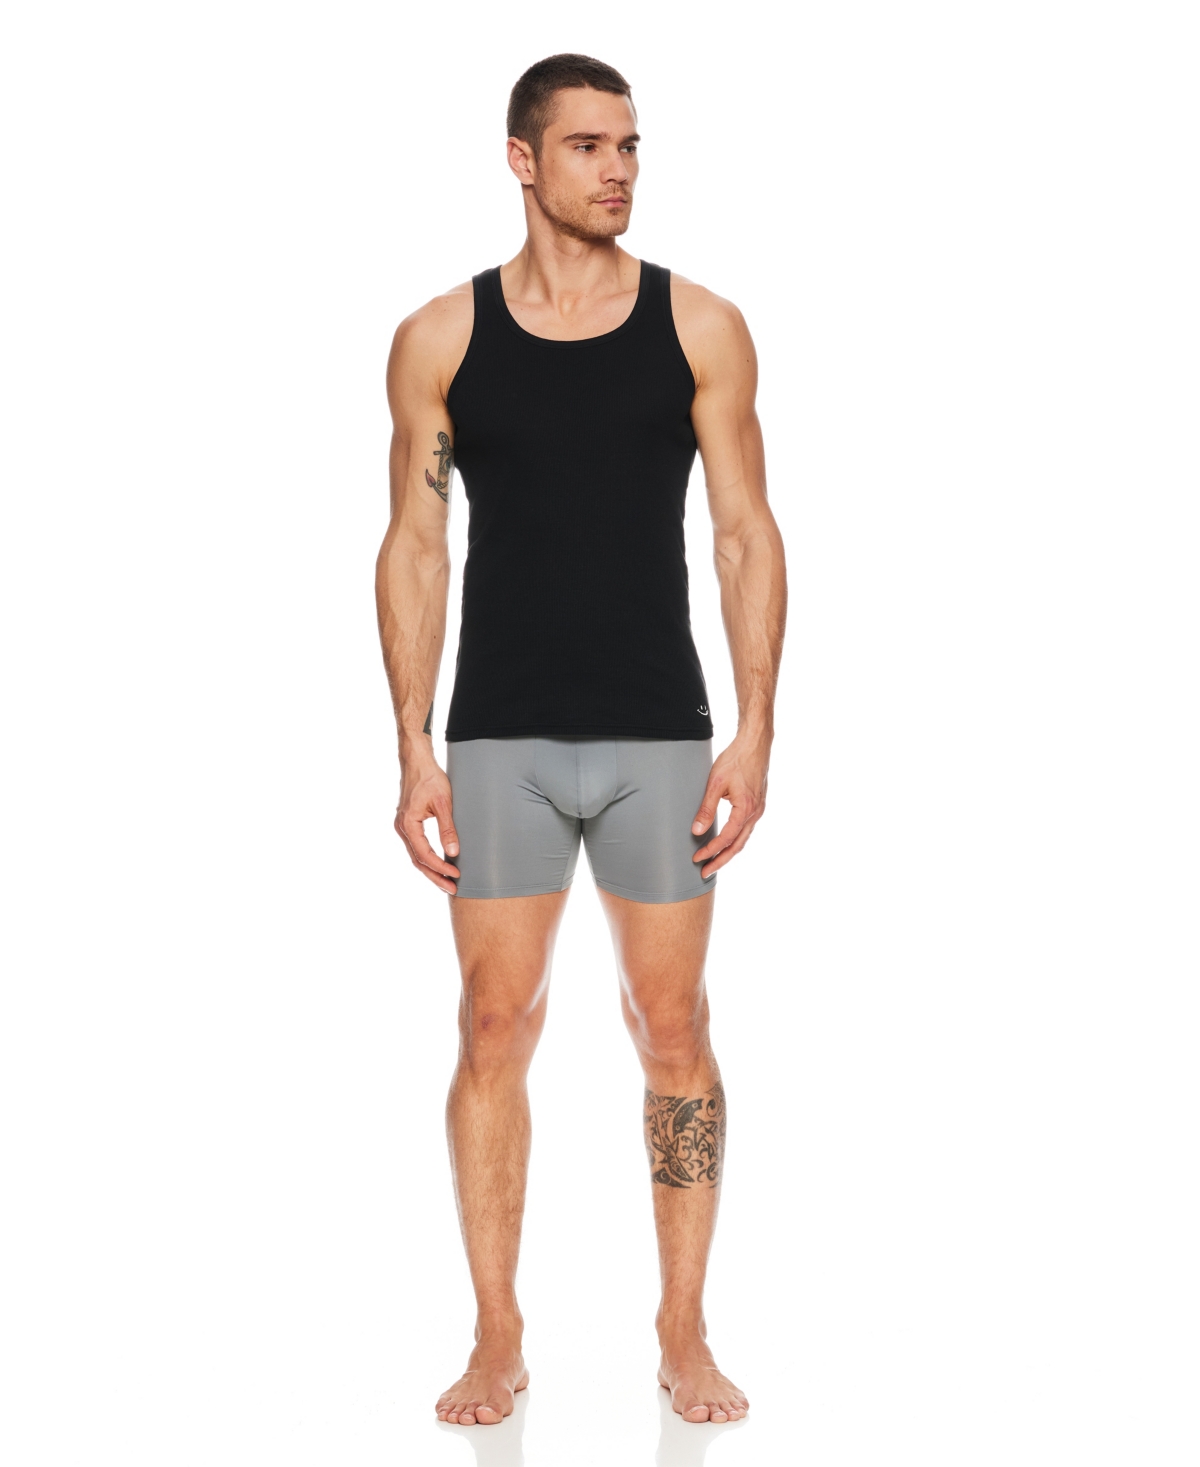 Men's Pullover Tank Tops Athletic Shirts, Pack of 4 - Black